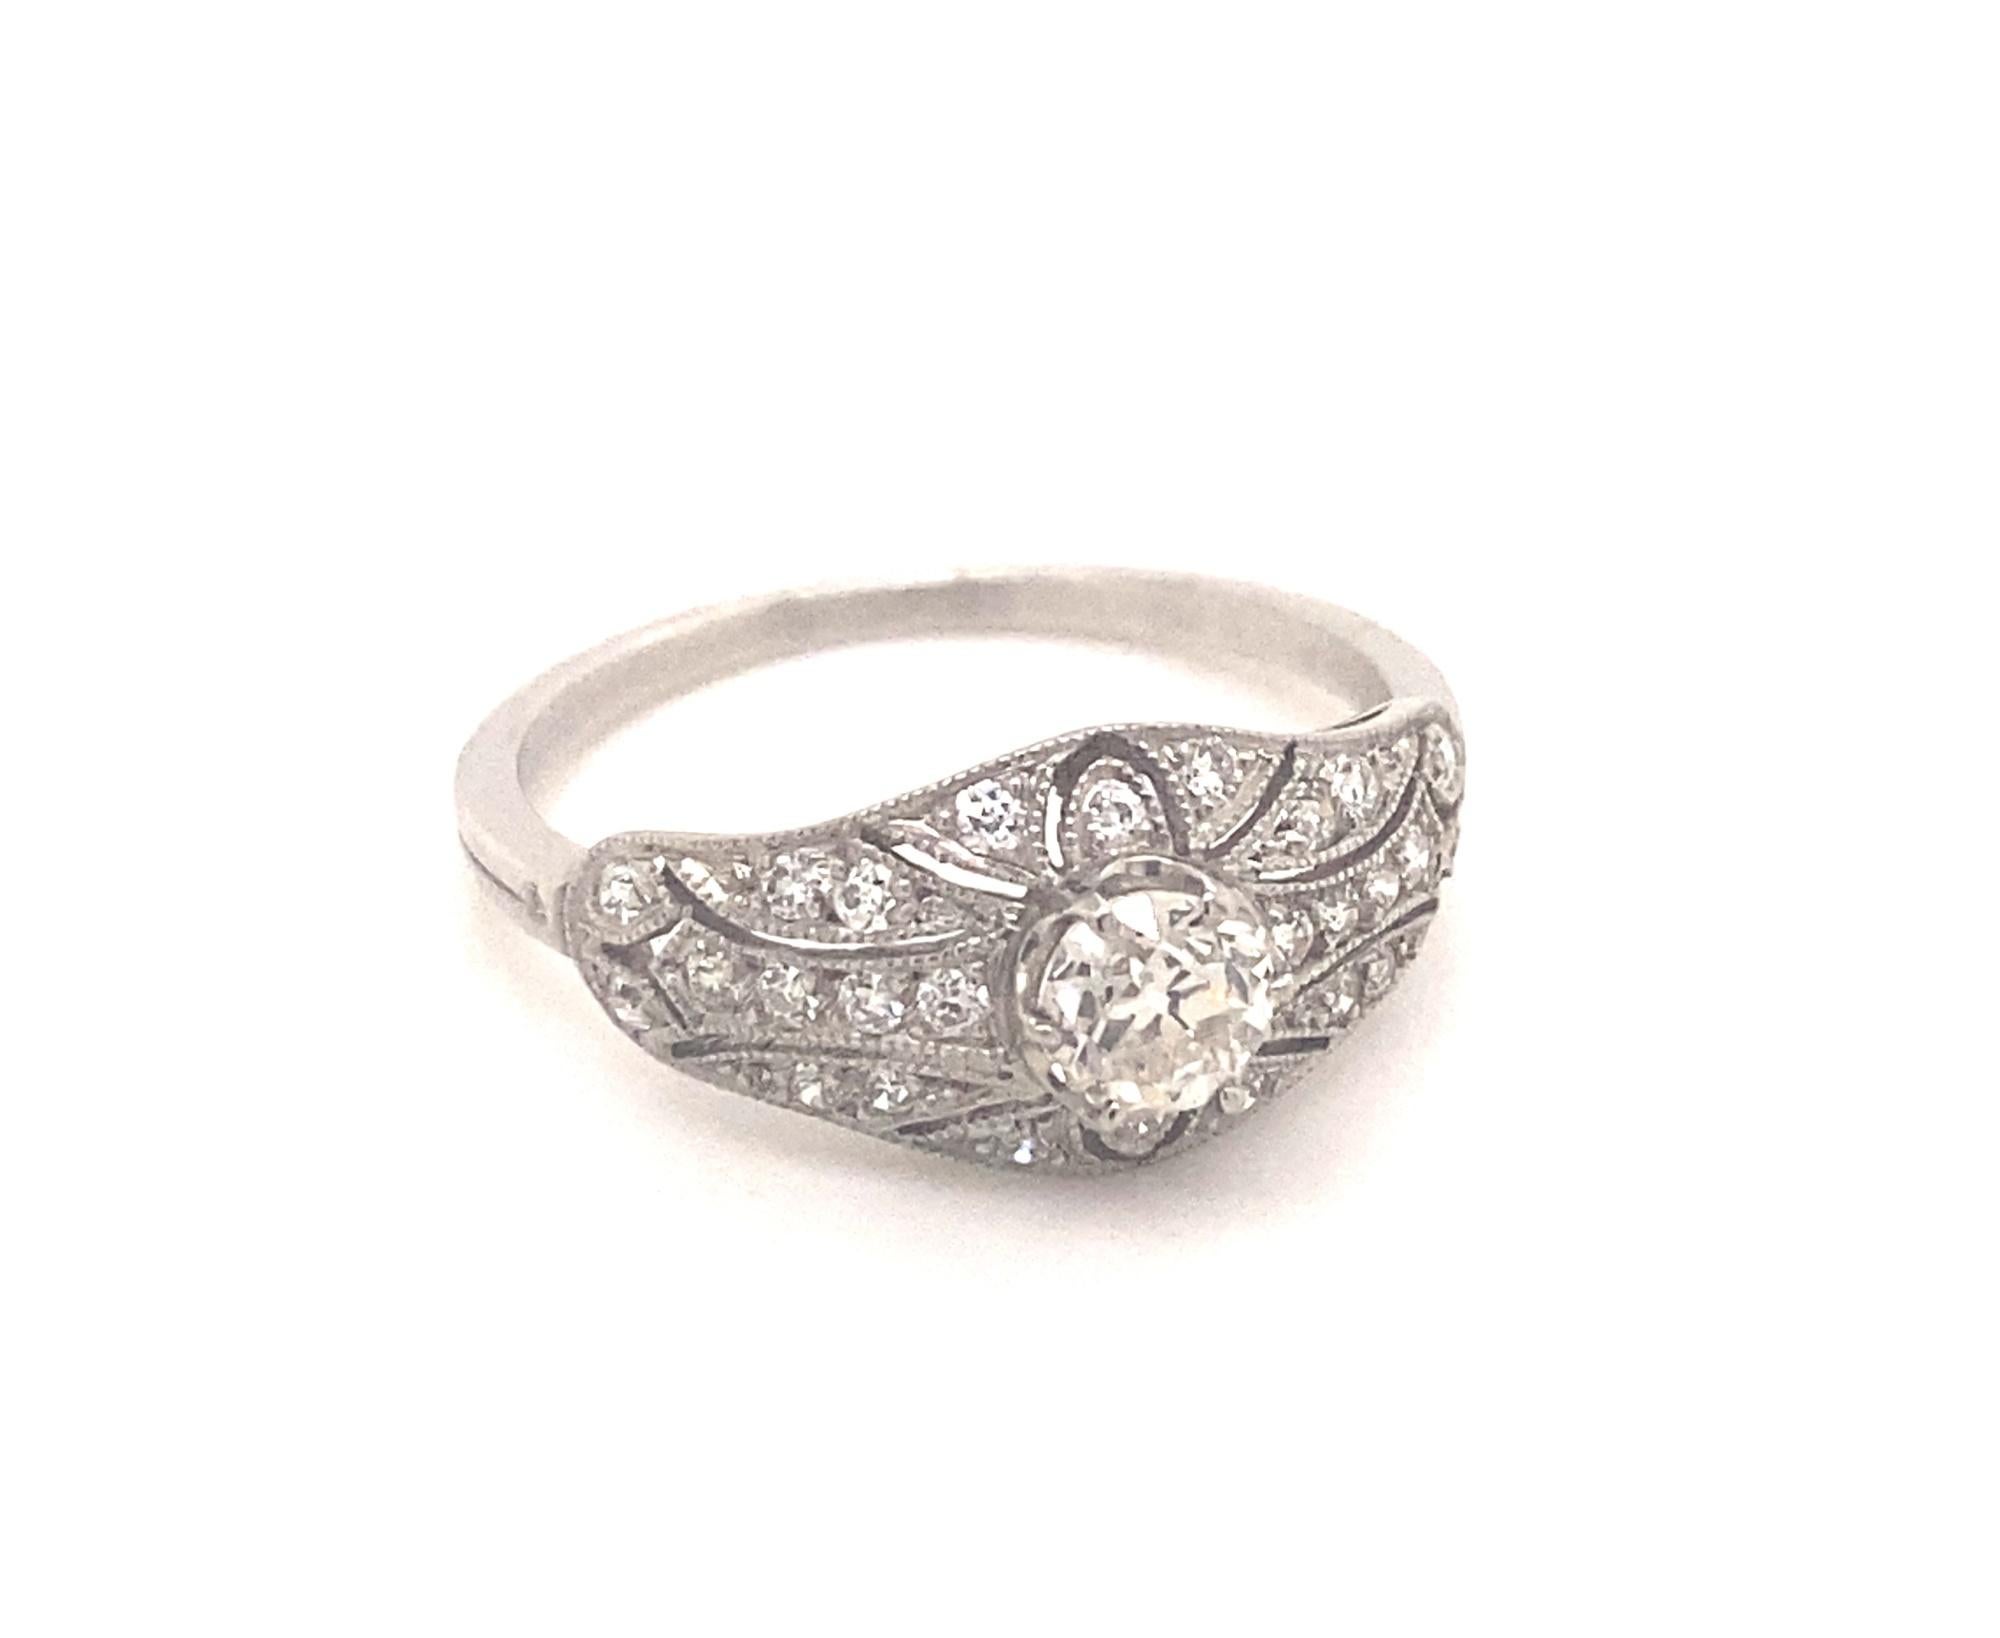 This is a beautiful art deco style ring with an intricate filigree design in platinum.  The ring is set with .38 carat old mine cut in the center I color VS-2 clarity.  There are 26 additional diamonds H color VS-2 clarity total weight .60 carats.